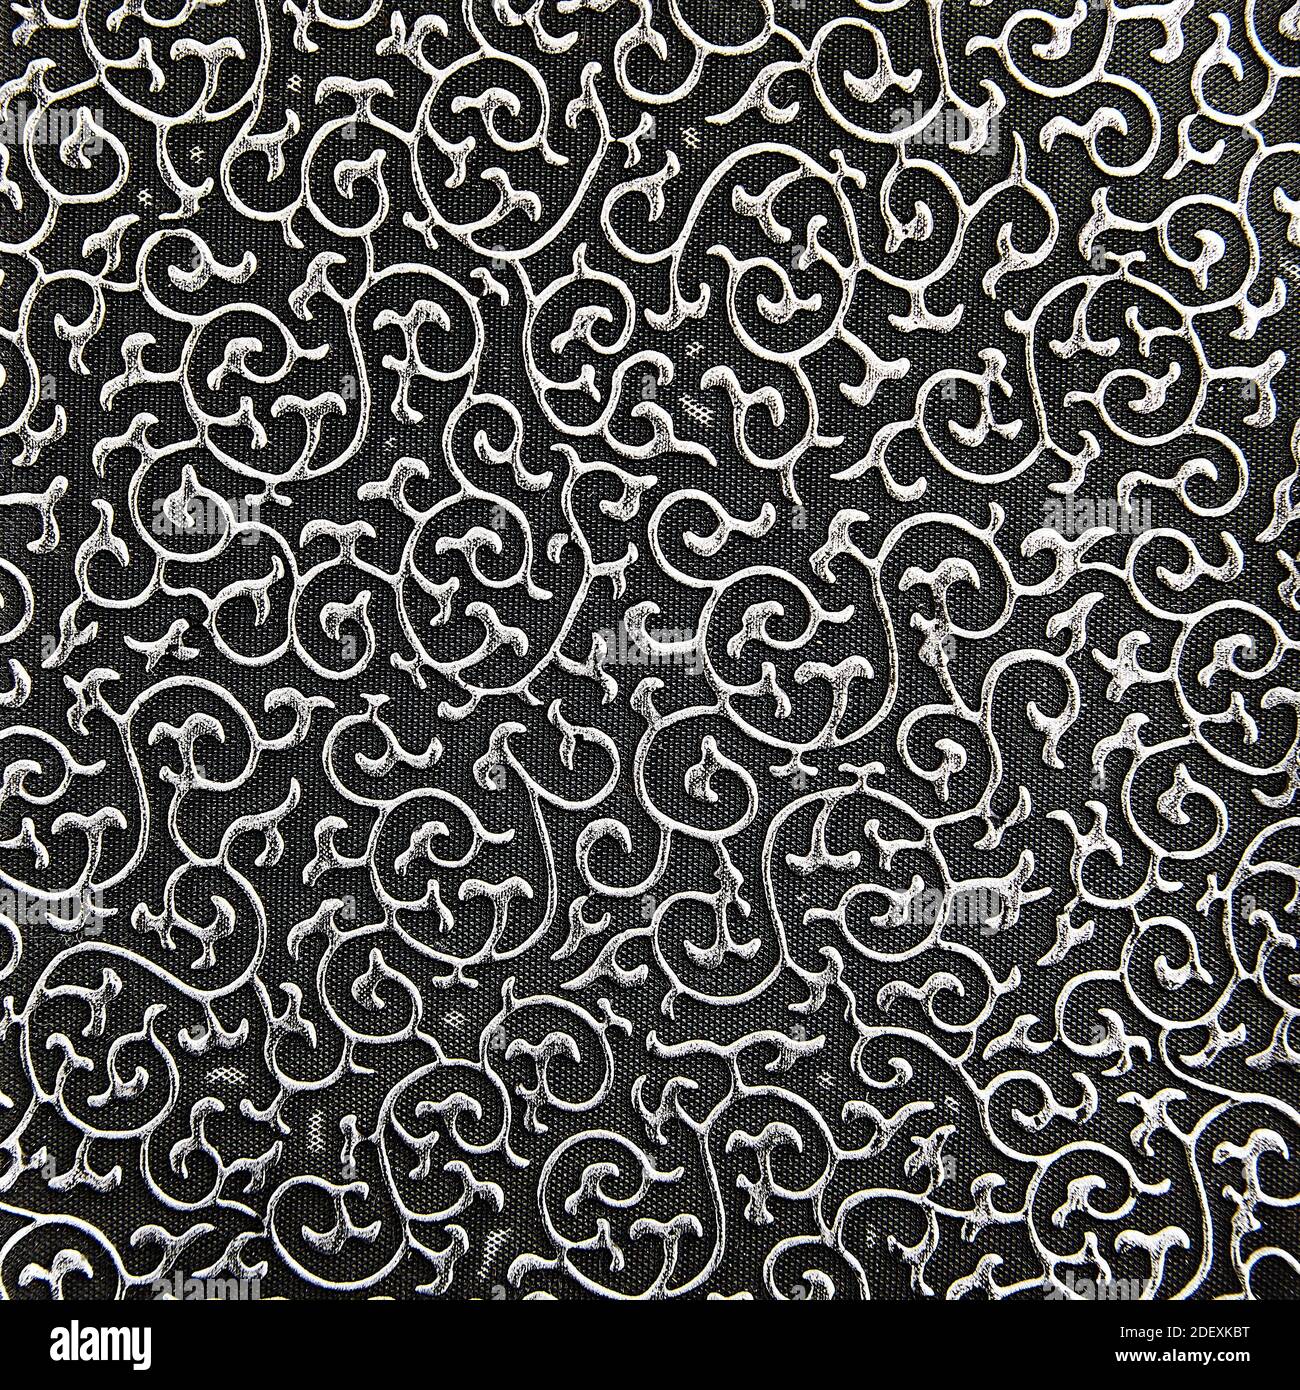 Fabric texture patterns black silver for background or design Stock Photo